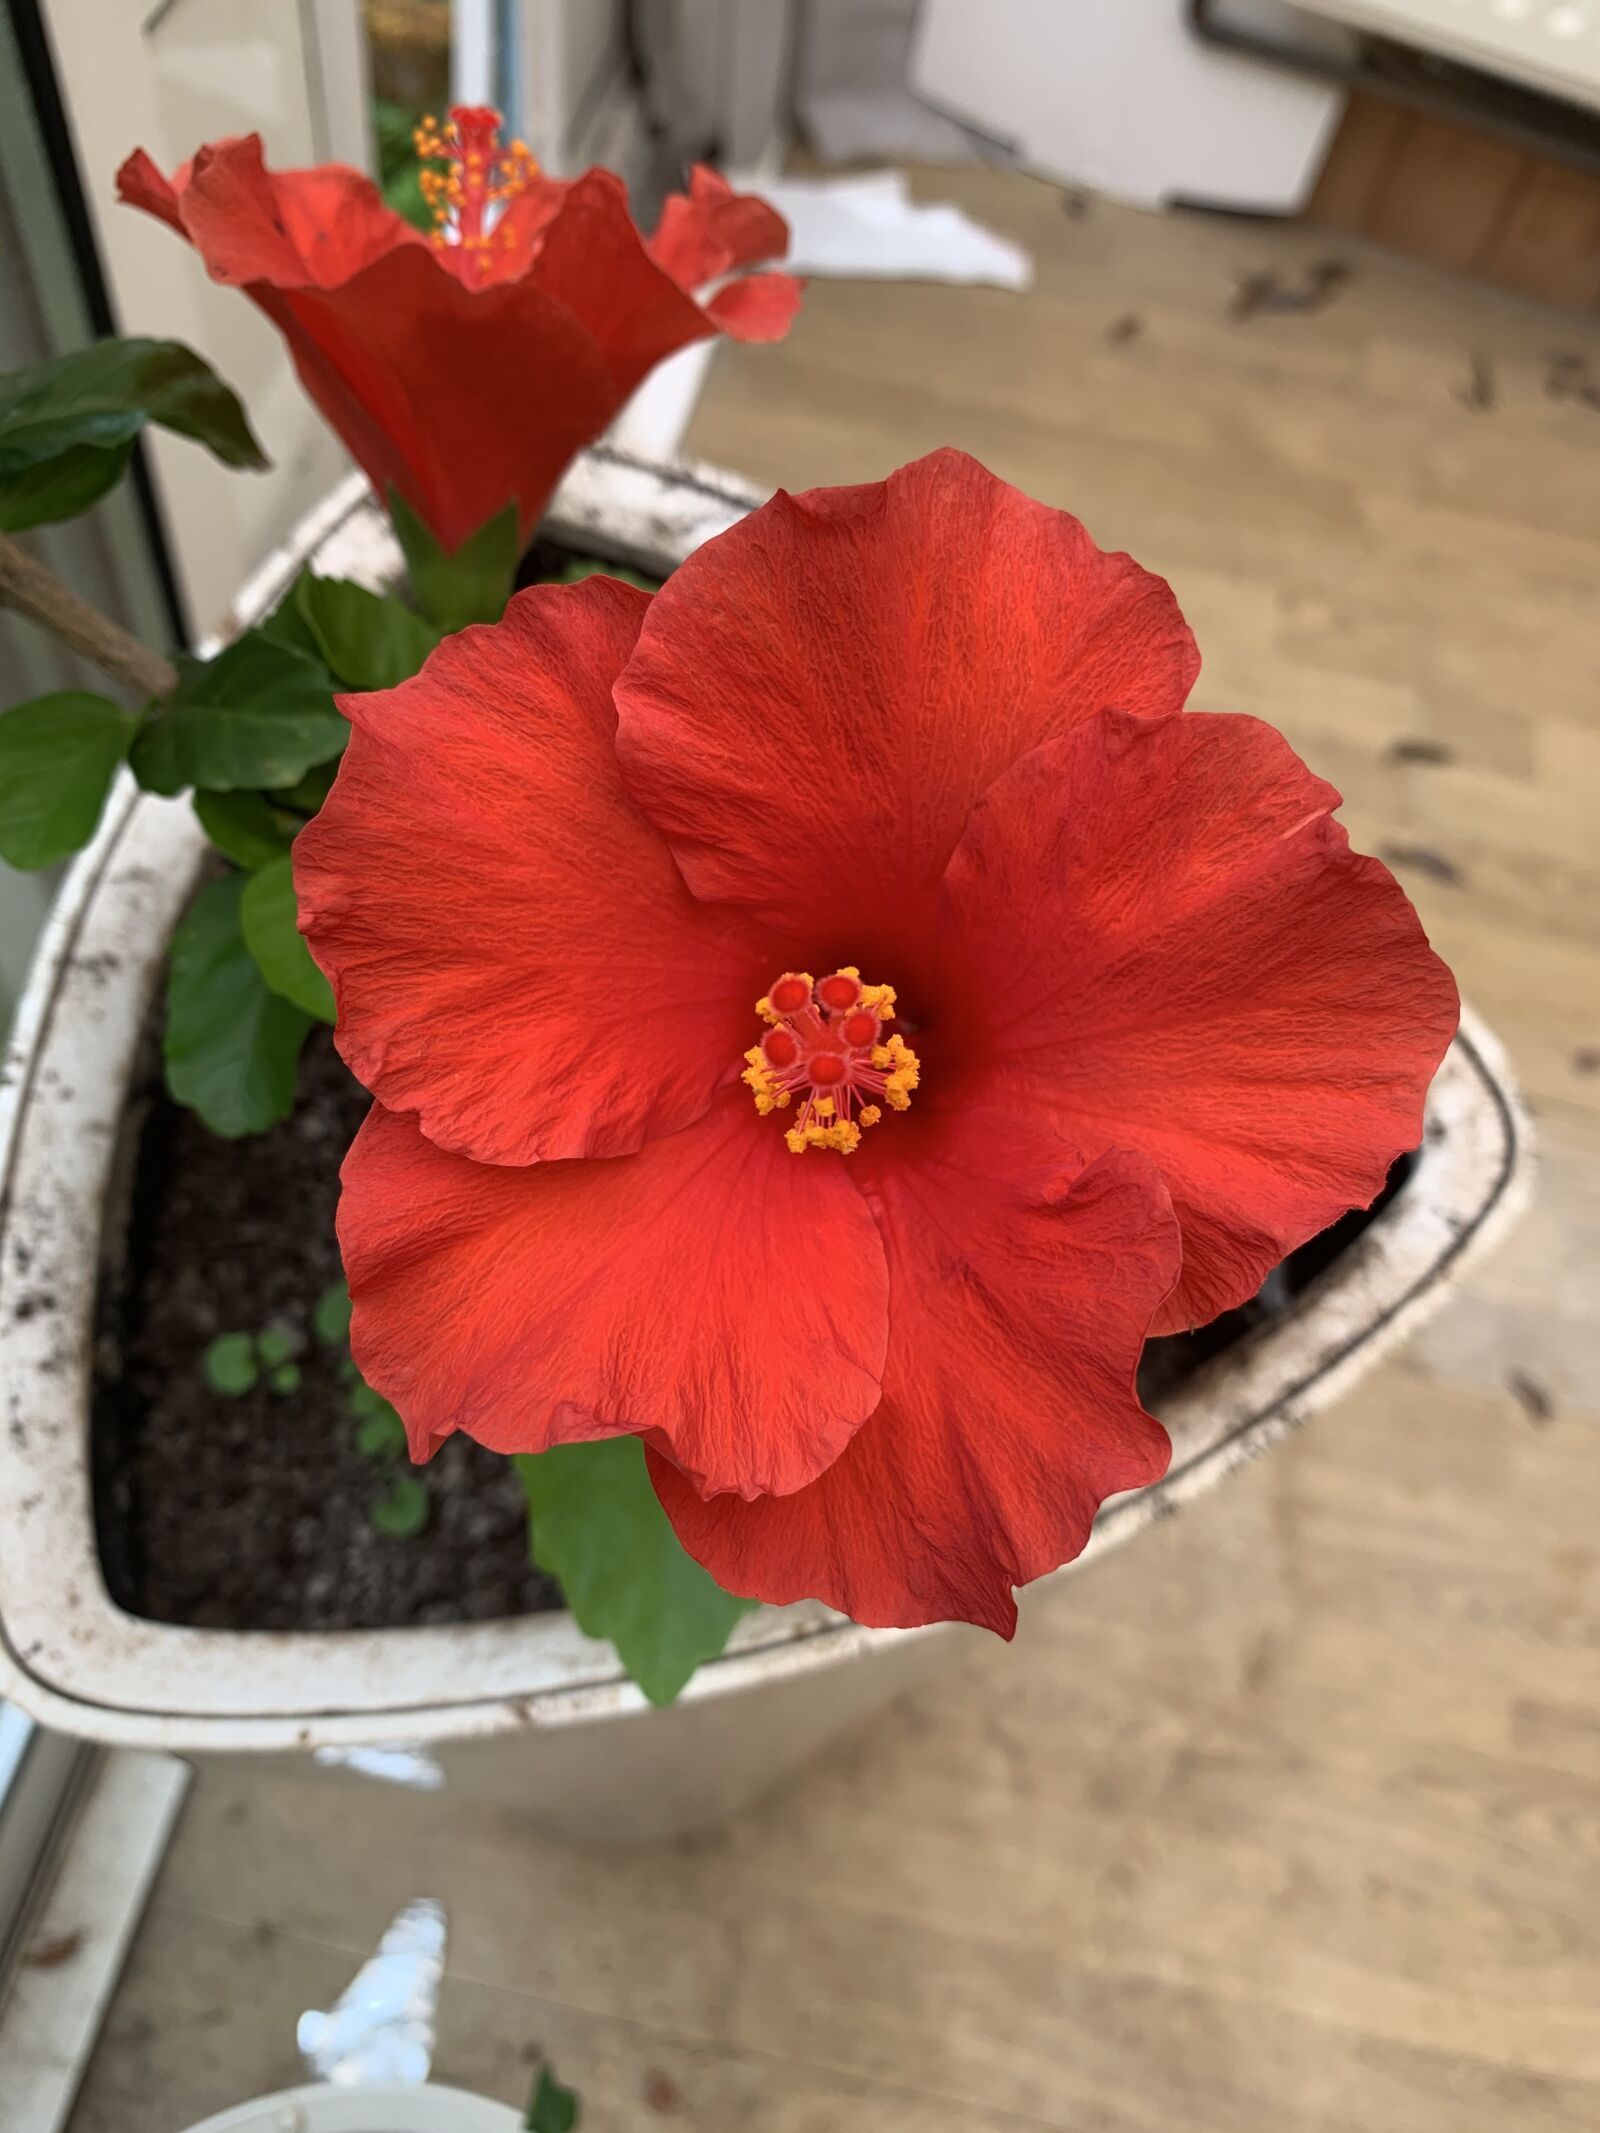 Apple iPhone XR sample photo. Flower, red, hisbiscus photography